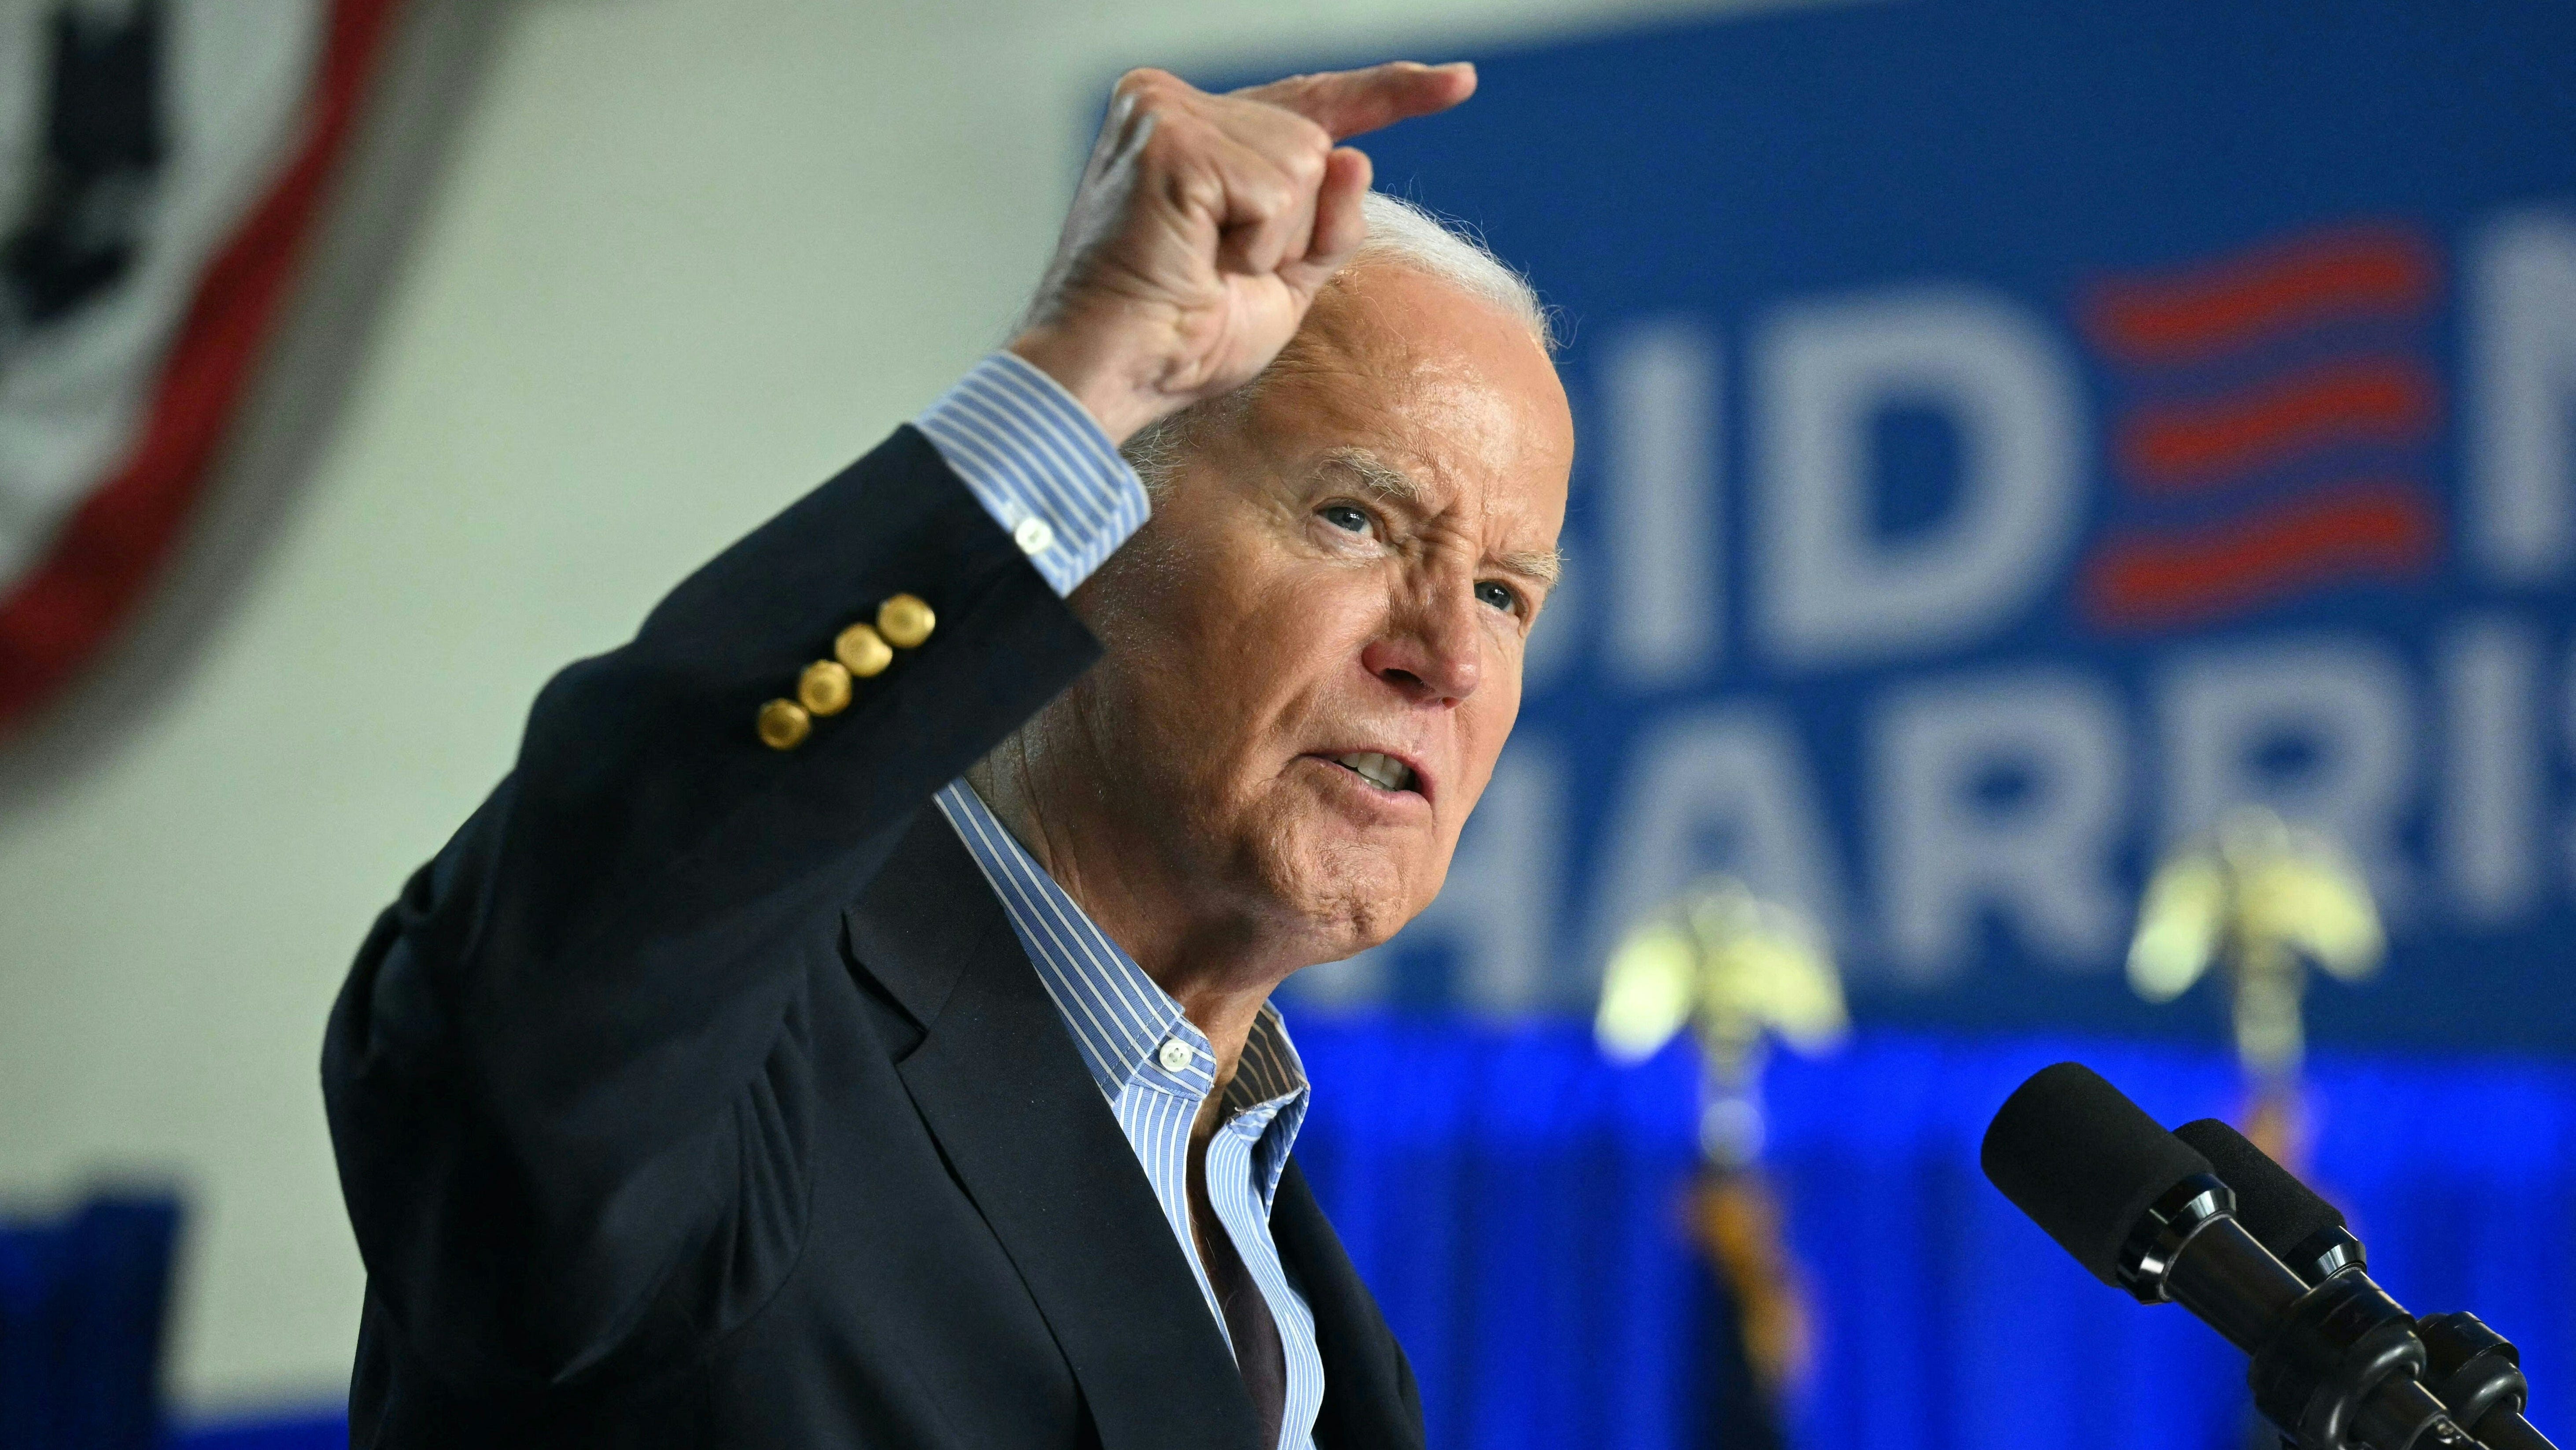 'They're trying to push me out,' Biden tells voters